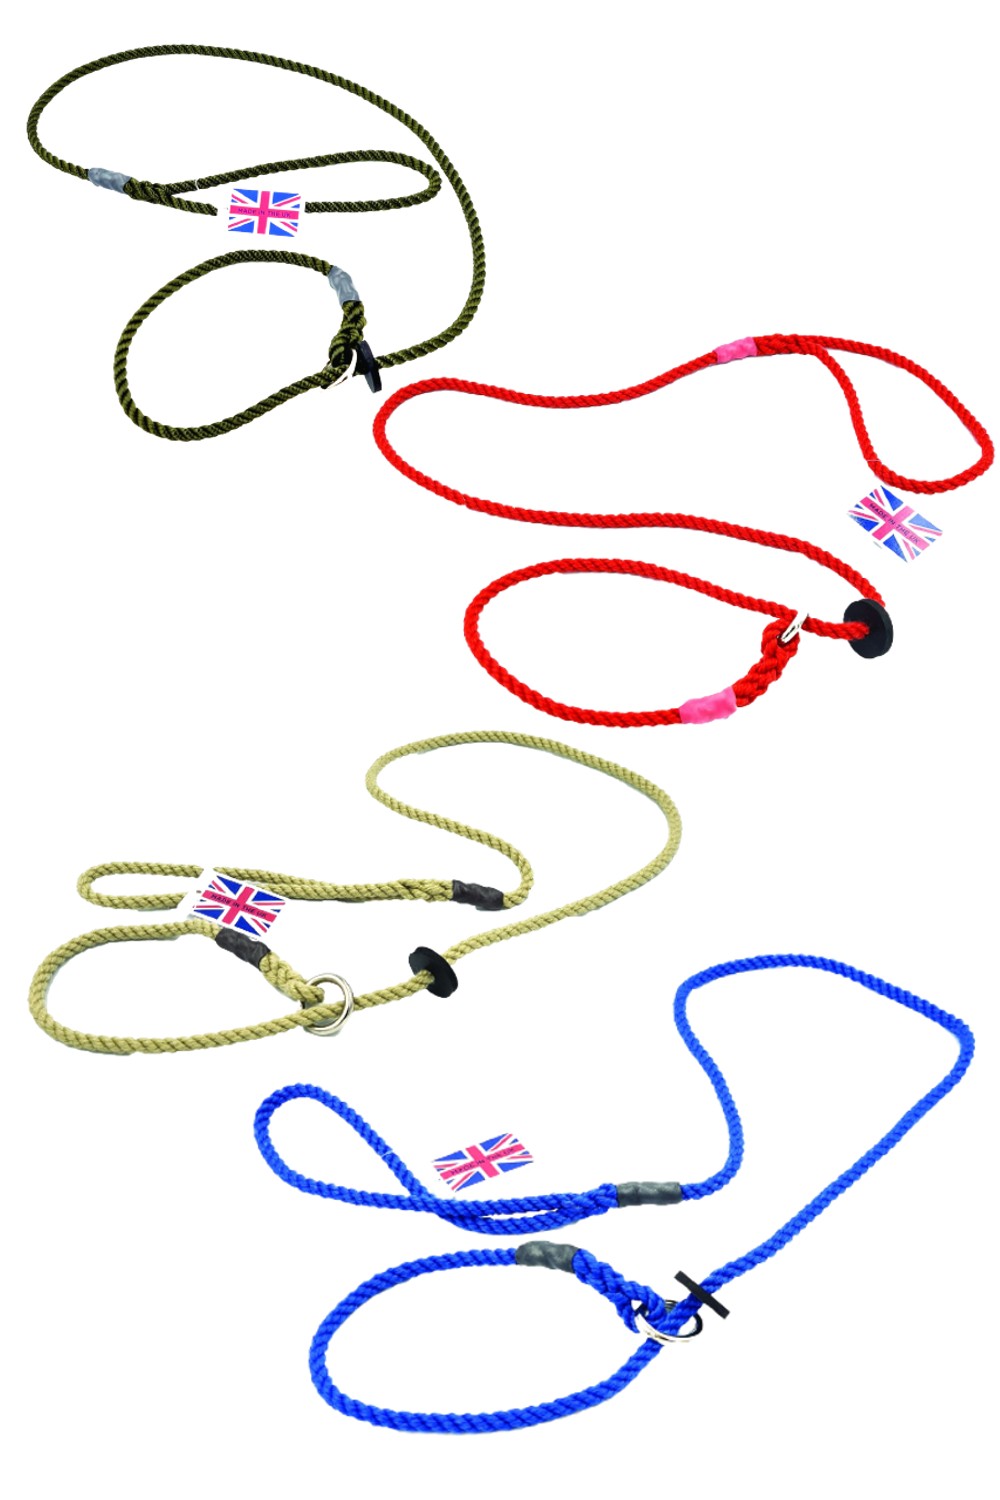 Bisley Deluxe Slip Lead with Rubber Stop In Green, Red, Natural and Blue